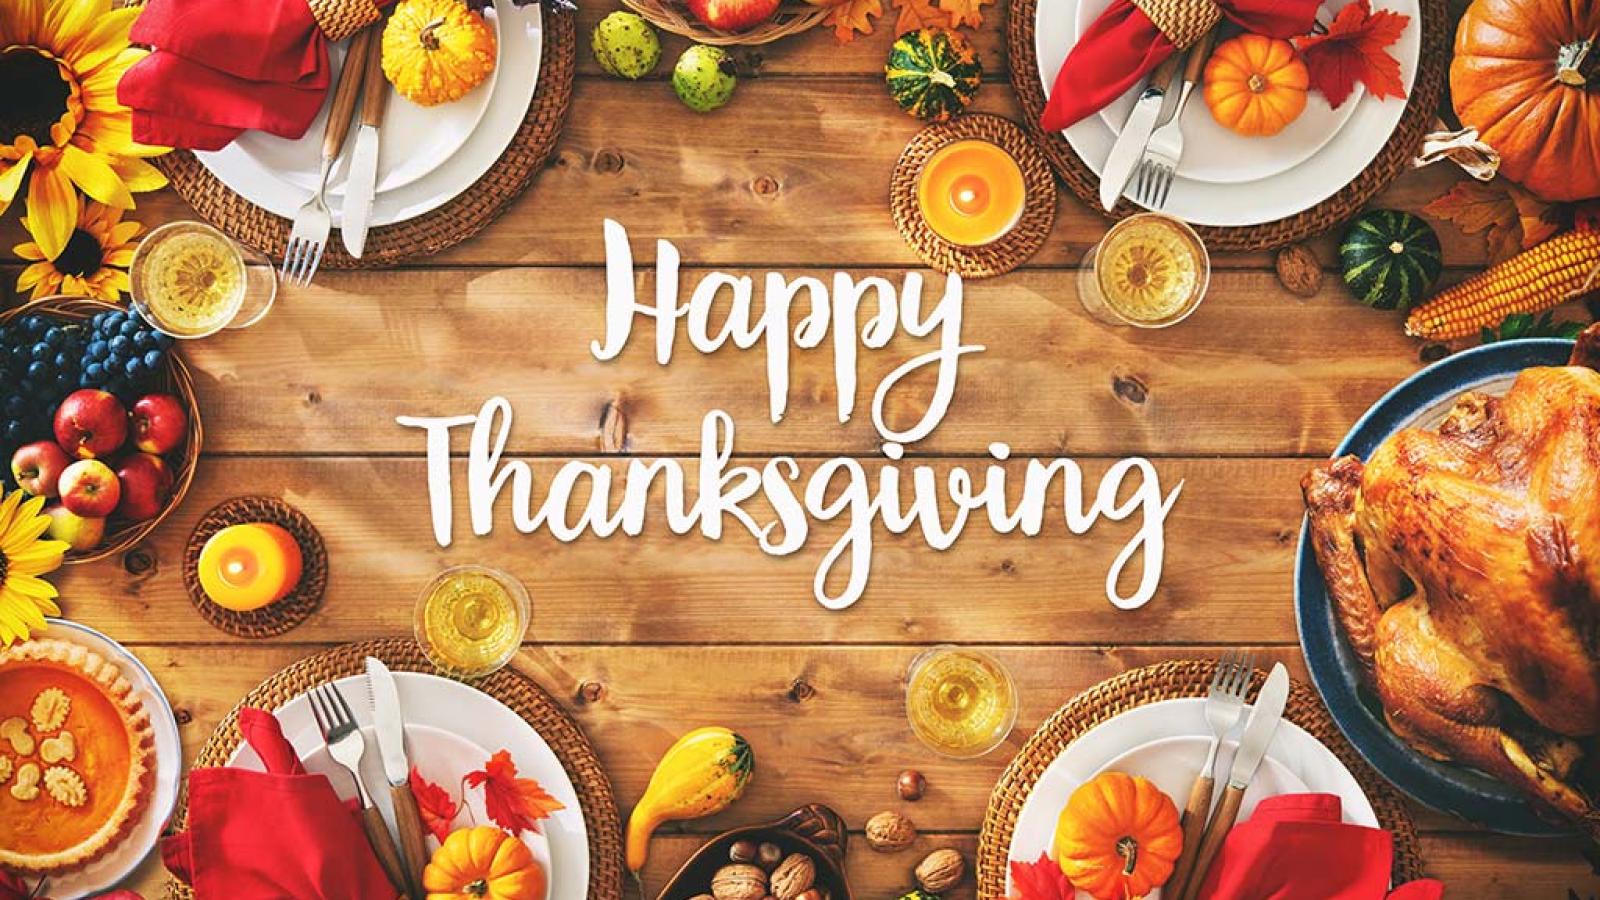 Happy Thanksgiving to our community!